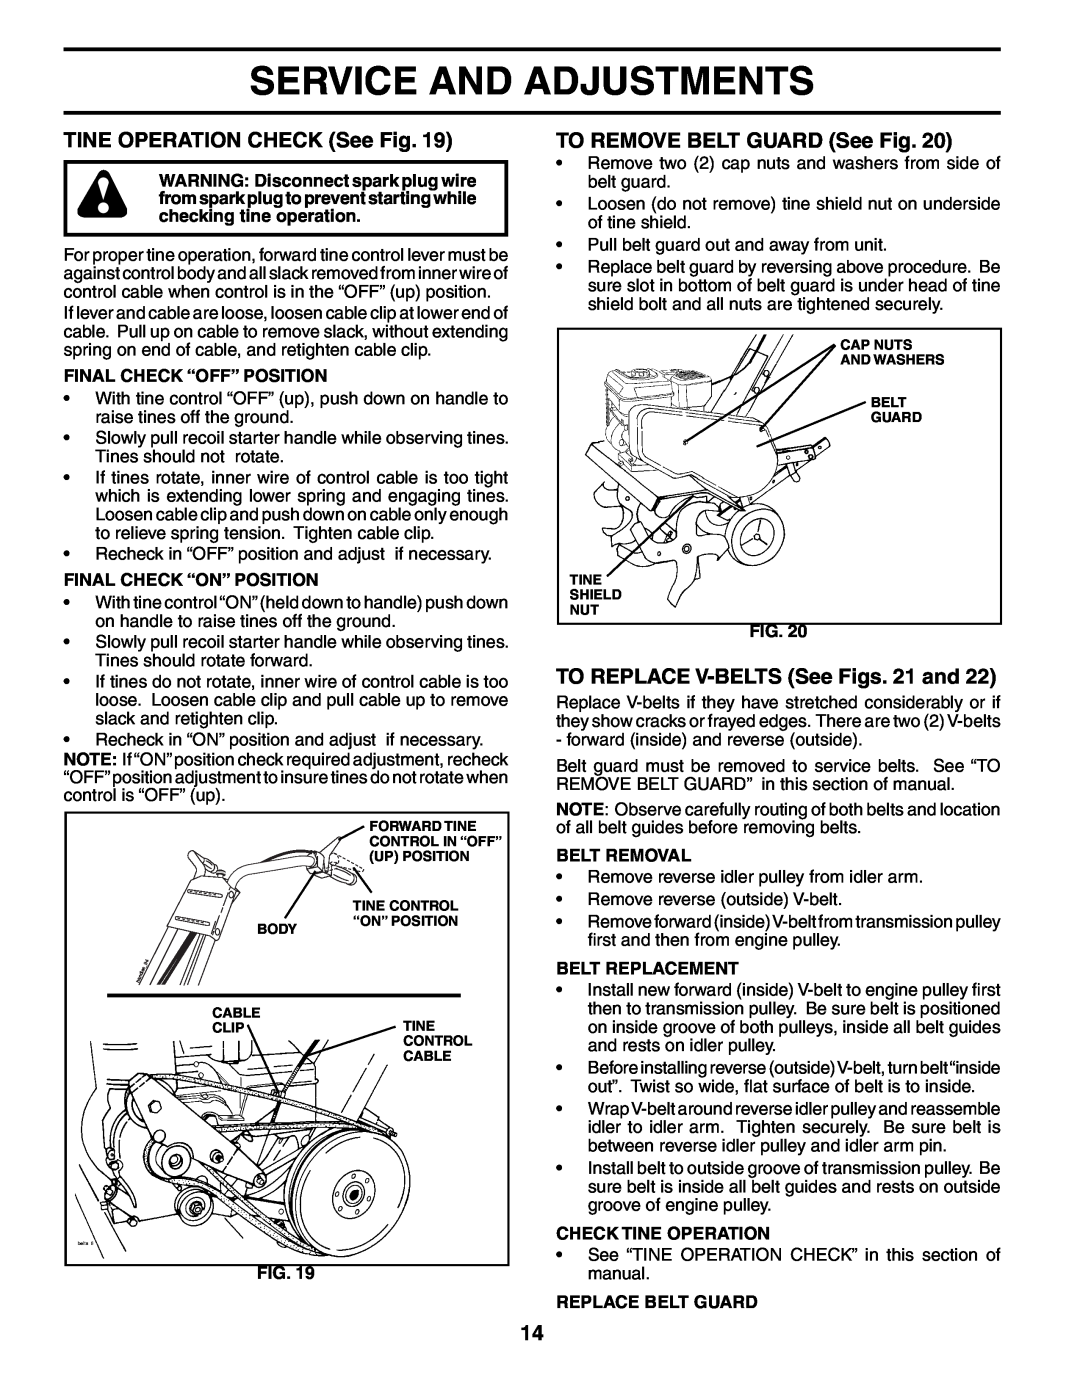 Poulan AGF550A owner manual TINE OPERATION CHECK See Fig, TO REMOVE BELT GUARD See Fig, TO REPLACE V-BELTS See Figs. 21 and 